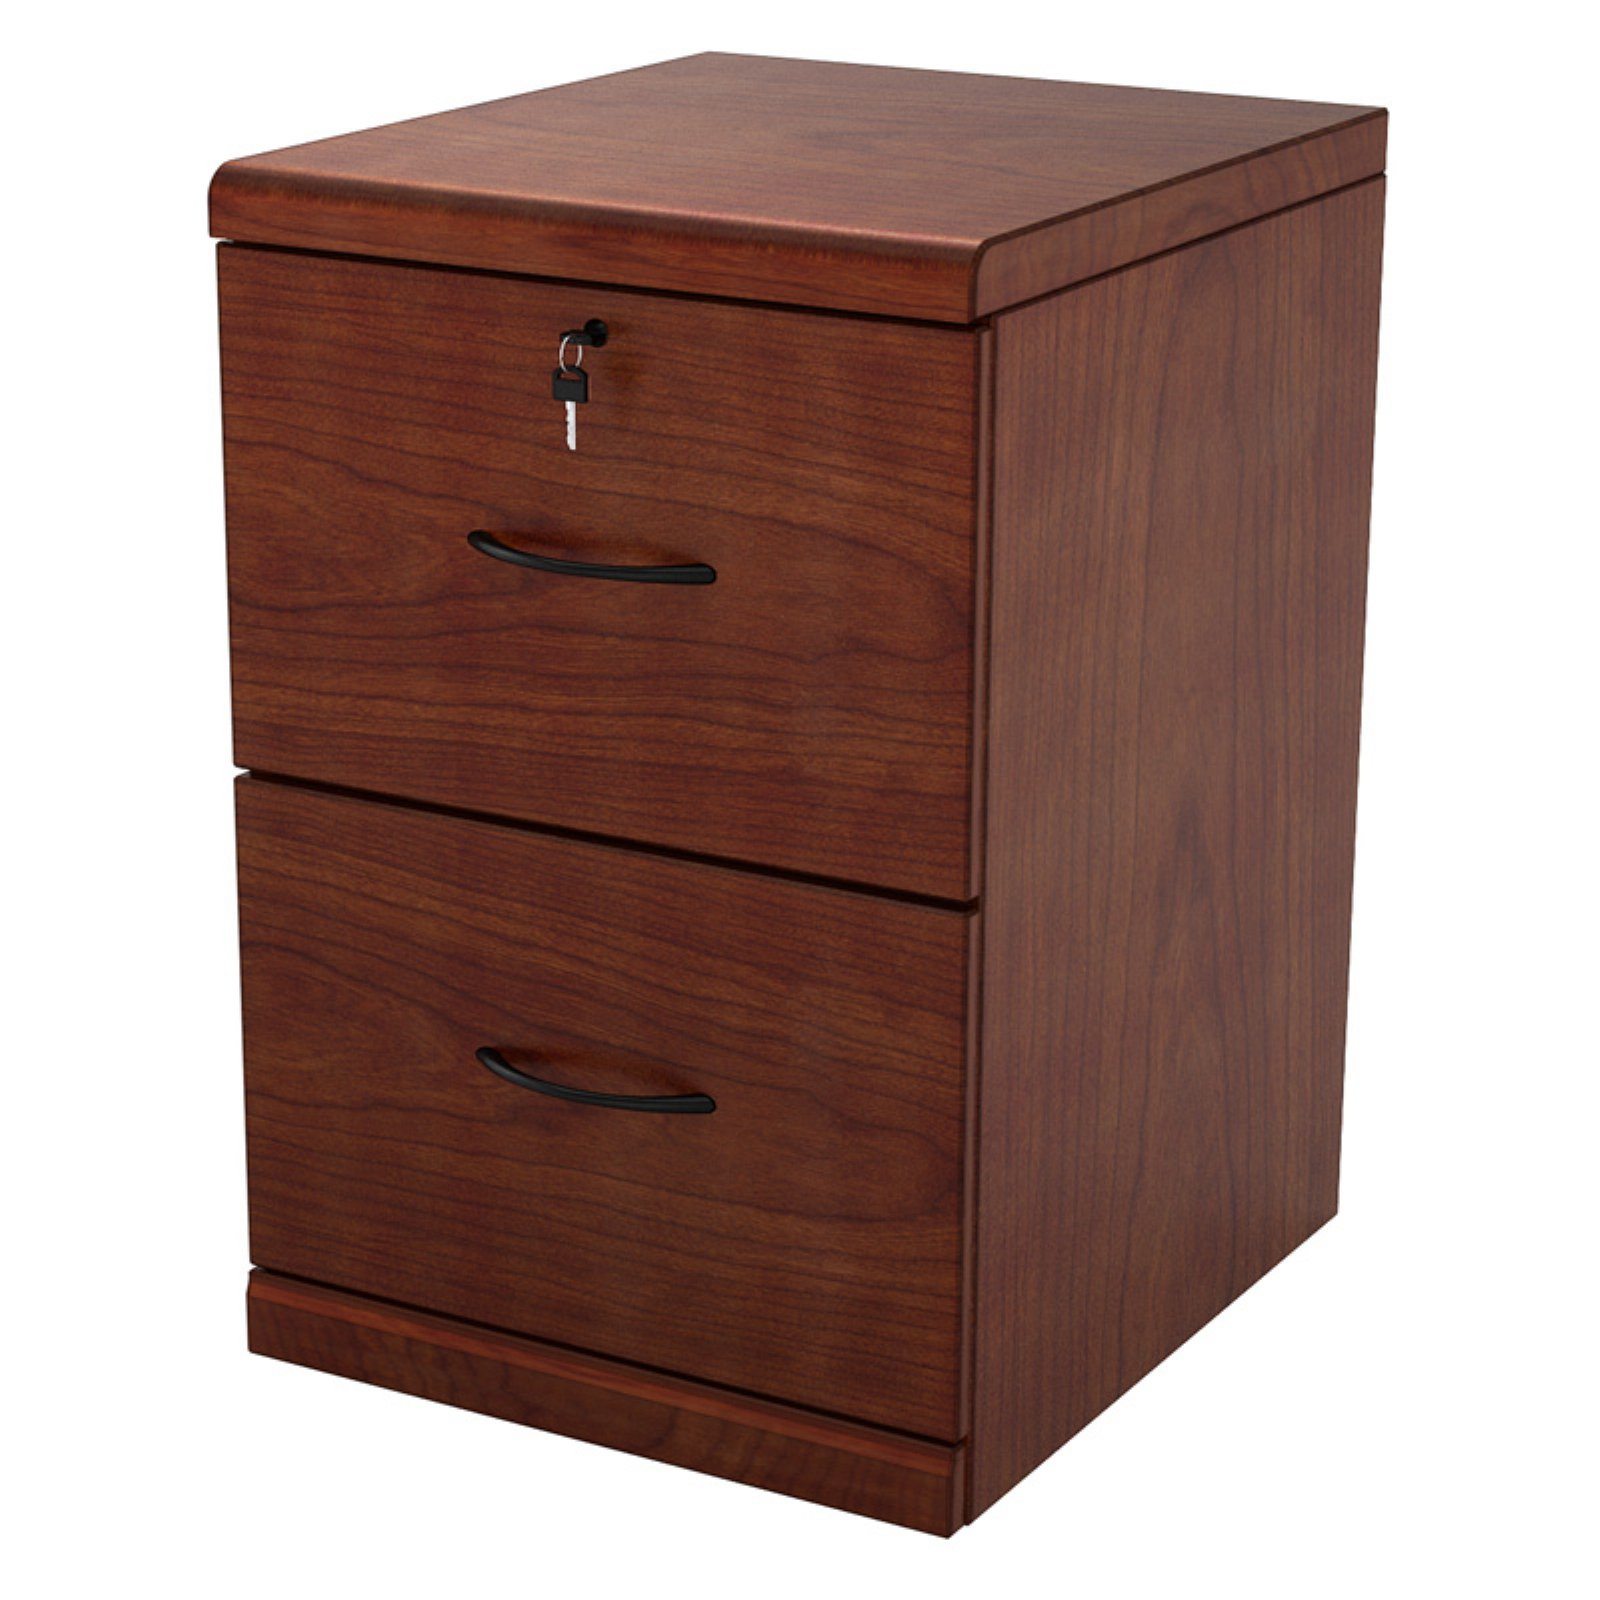 2 Drawer Vertical Wood Lockable Filing Cabinet Cherry Walmart with size 1600 X 1600